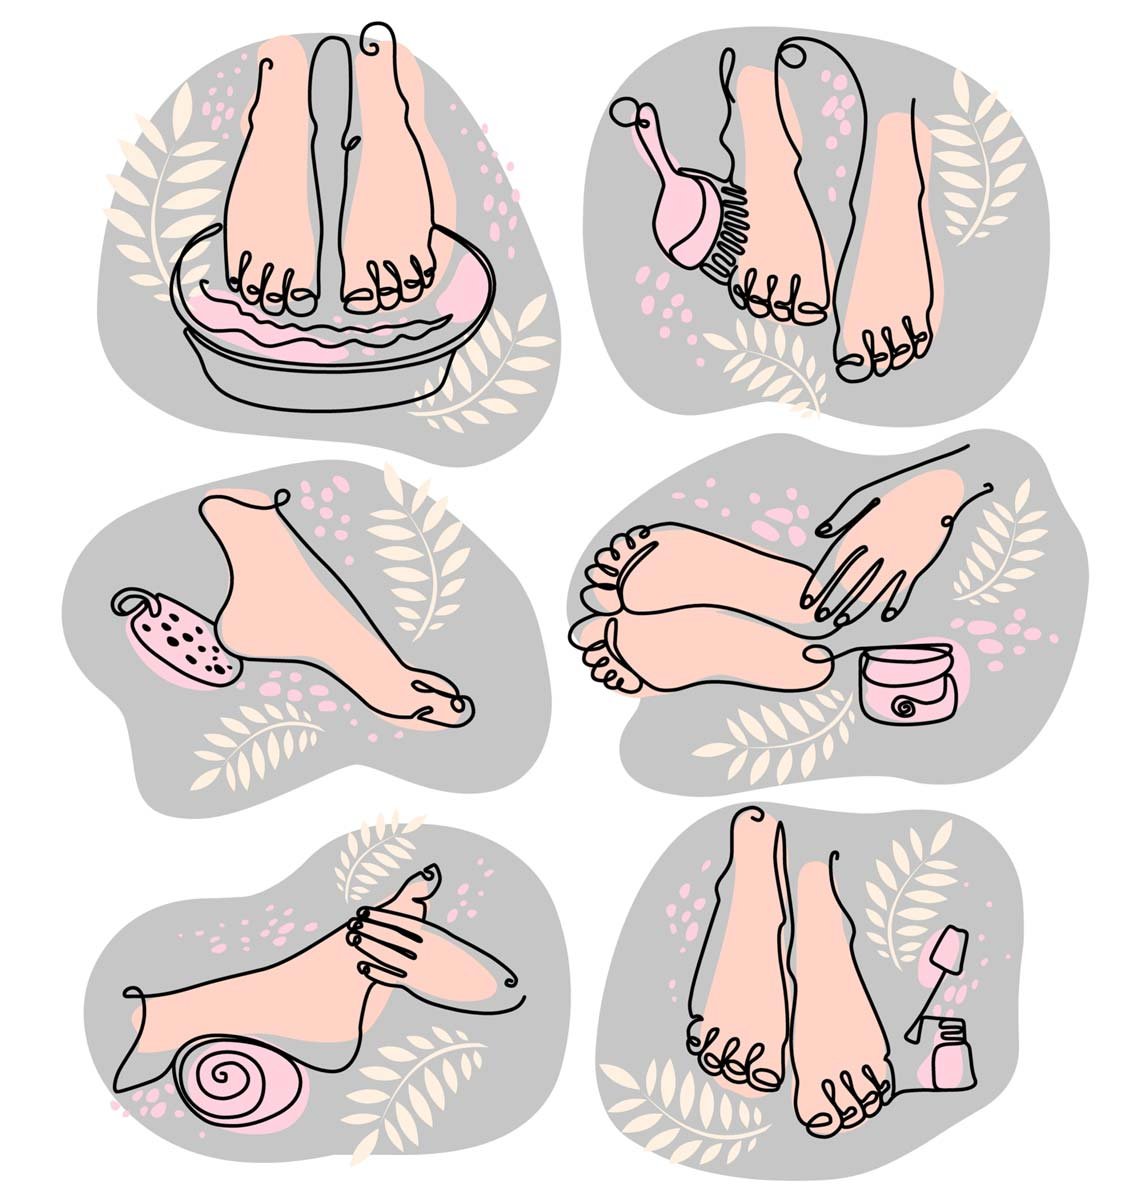 Process:  The first thing you'll need to do is soak your feet in warm water for about five minutes. This will help soften your skin, hydrate the feet and clean the nails.  Next, using some nail clippers cut and even out your nails, and clip off any excess skin or hangnails.  Then file your nails to the selected style like square, or round nails. There are not many different styles for toenail designs (on pedicure feet). But the last thing anyone should have are toenails that are overgrown and hanging over the toe stub.  Next is "cuticle cleanup", you can use a cuticle pusher to push the skin on the nails back to shape the nailbeds a little more evenly. Then, you can use a cuticle remover on the edges of your nails if you have any excess cuticle growth, which tends to happen when the hands and feet are used a lot.  Buff any uneven areas of the nail bed using a nail buffer and place in the bathwater again to remove any dust left behind.  At this point, you can start the spa-like treatments by adding an exfoliating product to the feet and legs. You can use any sugar scrub you have, or make it yourself using sugar and olive oil/coconut oil.   Gently exfoliate the leg and feet, and using a pumice stone start to treat any callus areas on the bottom and sides of the feet. This pedicure for feet would be very similar to the typical manicure pedicure salon treatment.  Grab your favorite cream and apply generously to the shin, ankle, top of the feet, and soles and massage. Massage in an upwards motion to really get the blood flowing to and from the feet. The leg massage is the best part of the whole spa treatment.   Using your cotton rag or towel to thoroughly dry your feet and legs, the foot pedicure spa now moves into the application of nail polish. For men's pedicure, the pedicure y manicure could stop here. A man pedicure would only be the grooming and spa treatment unless the person wants their toes painted.  If painting, you will use some cotton balls on your nails pedicure to remove any residual polish from the nailbed.  Separate the toes, with a toe separator that could be made from foam (pre-bought) or at home using rolled-up paper towels.  Paint gently and swiftly, you can use a pointed cotton swab (like this one) to get the paint off the skin beside the nails.